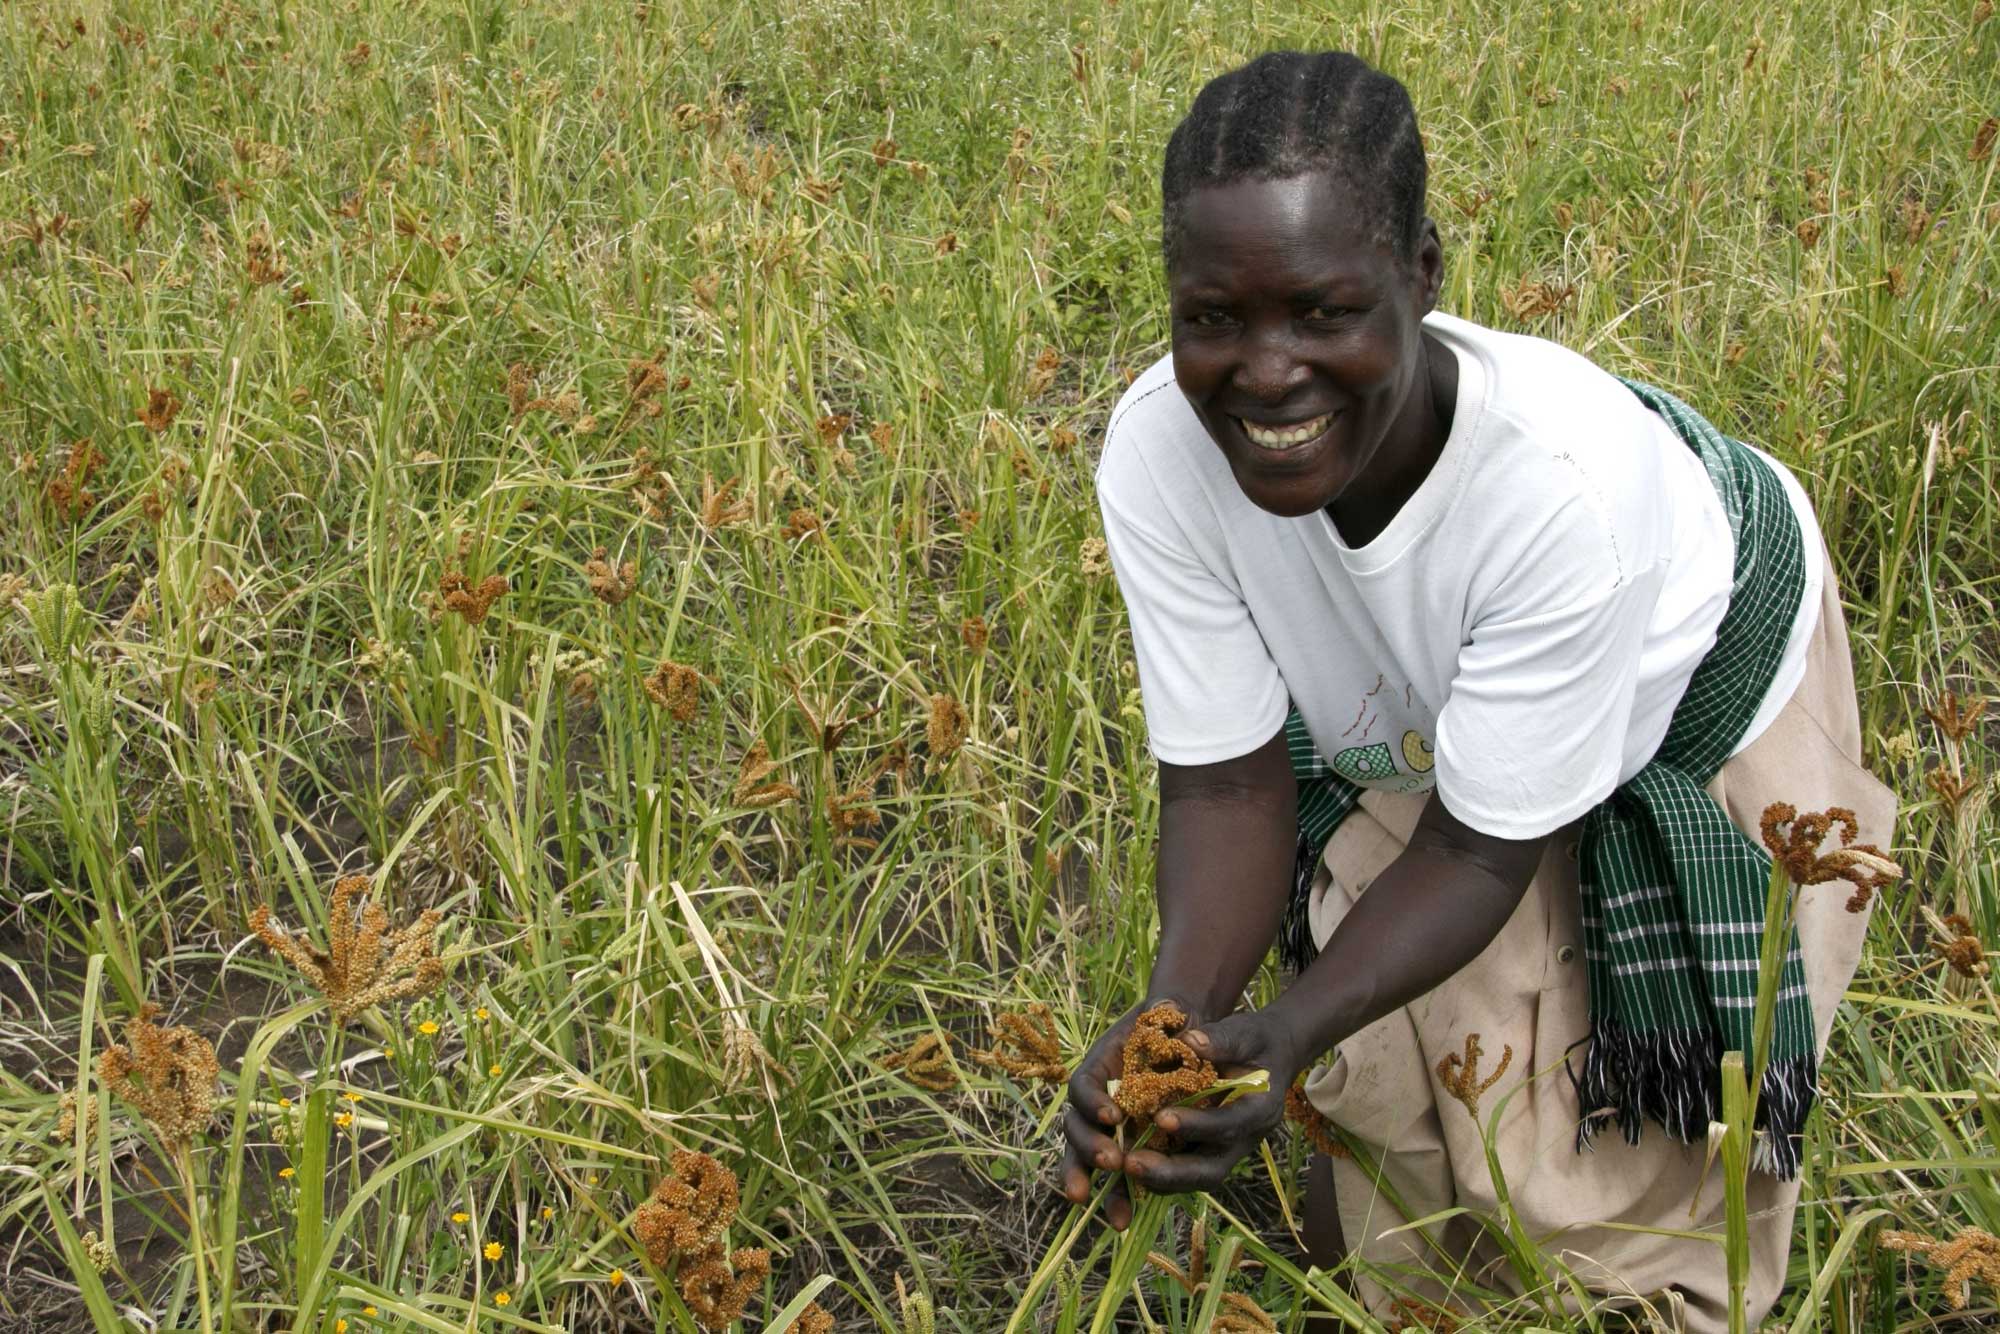 Photograph of a woman standing in a field of finger millet in Uganda. The woman has a white T-shirt, beige pants or a skirt, and a green fringed belt. She is bent over slightly and holding finger millet inflorescences cupped in both hands. She is smiling and looking at the camera. 